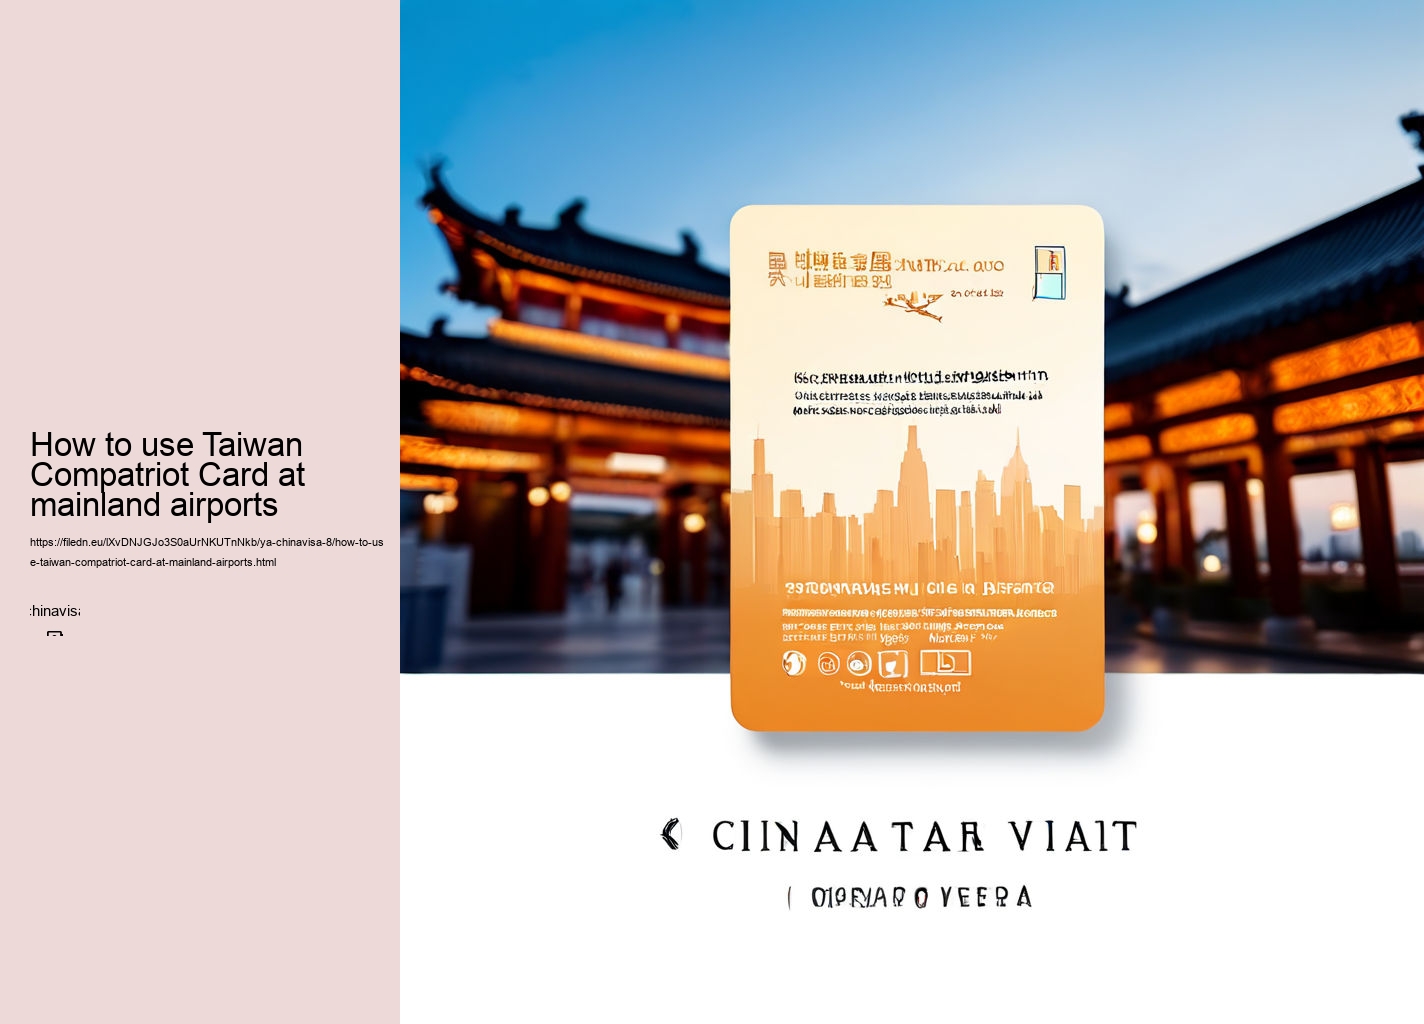 How to use Taiwan Compatriot Card at mainland airports